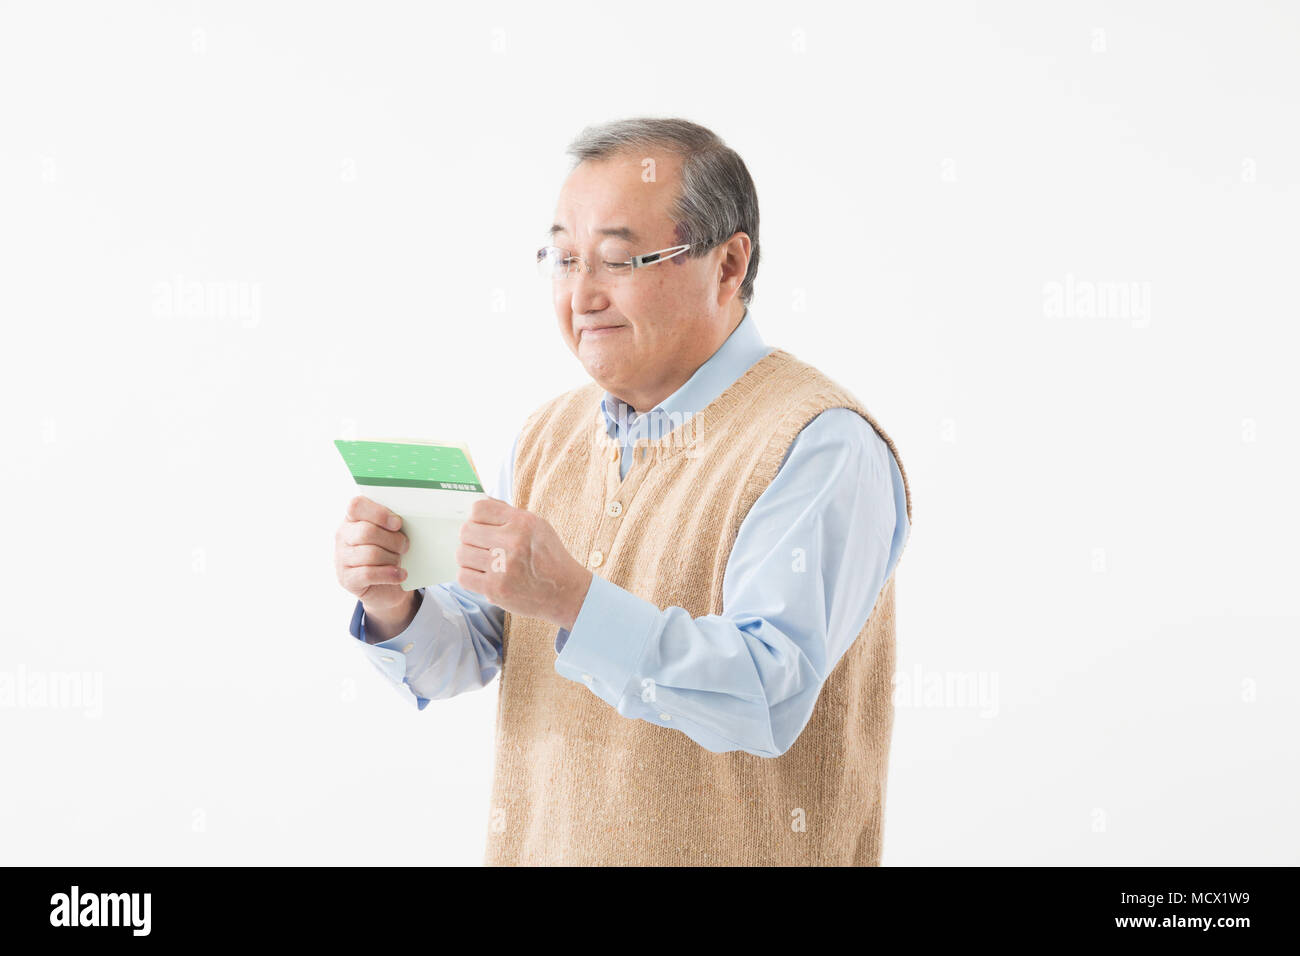 Senior man looking at passbook with smile Stock Photo